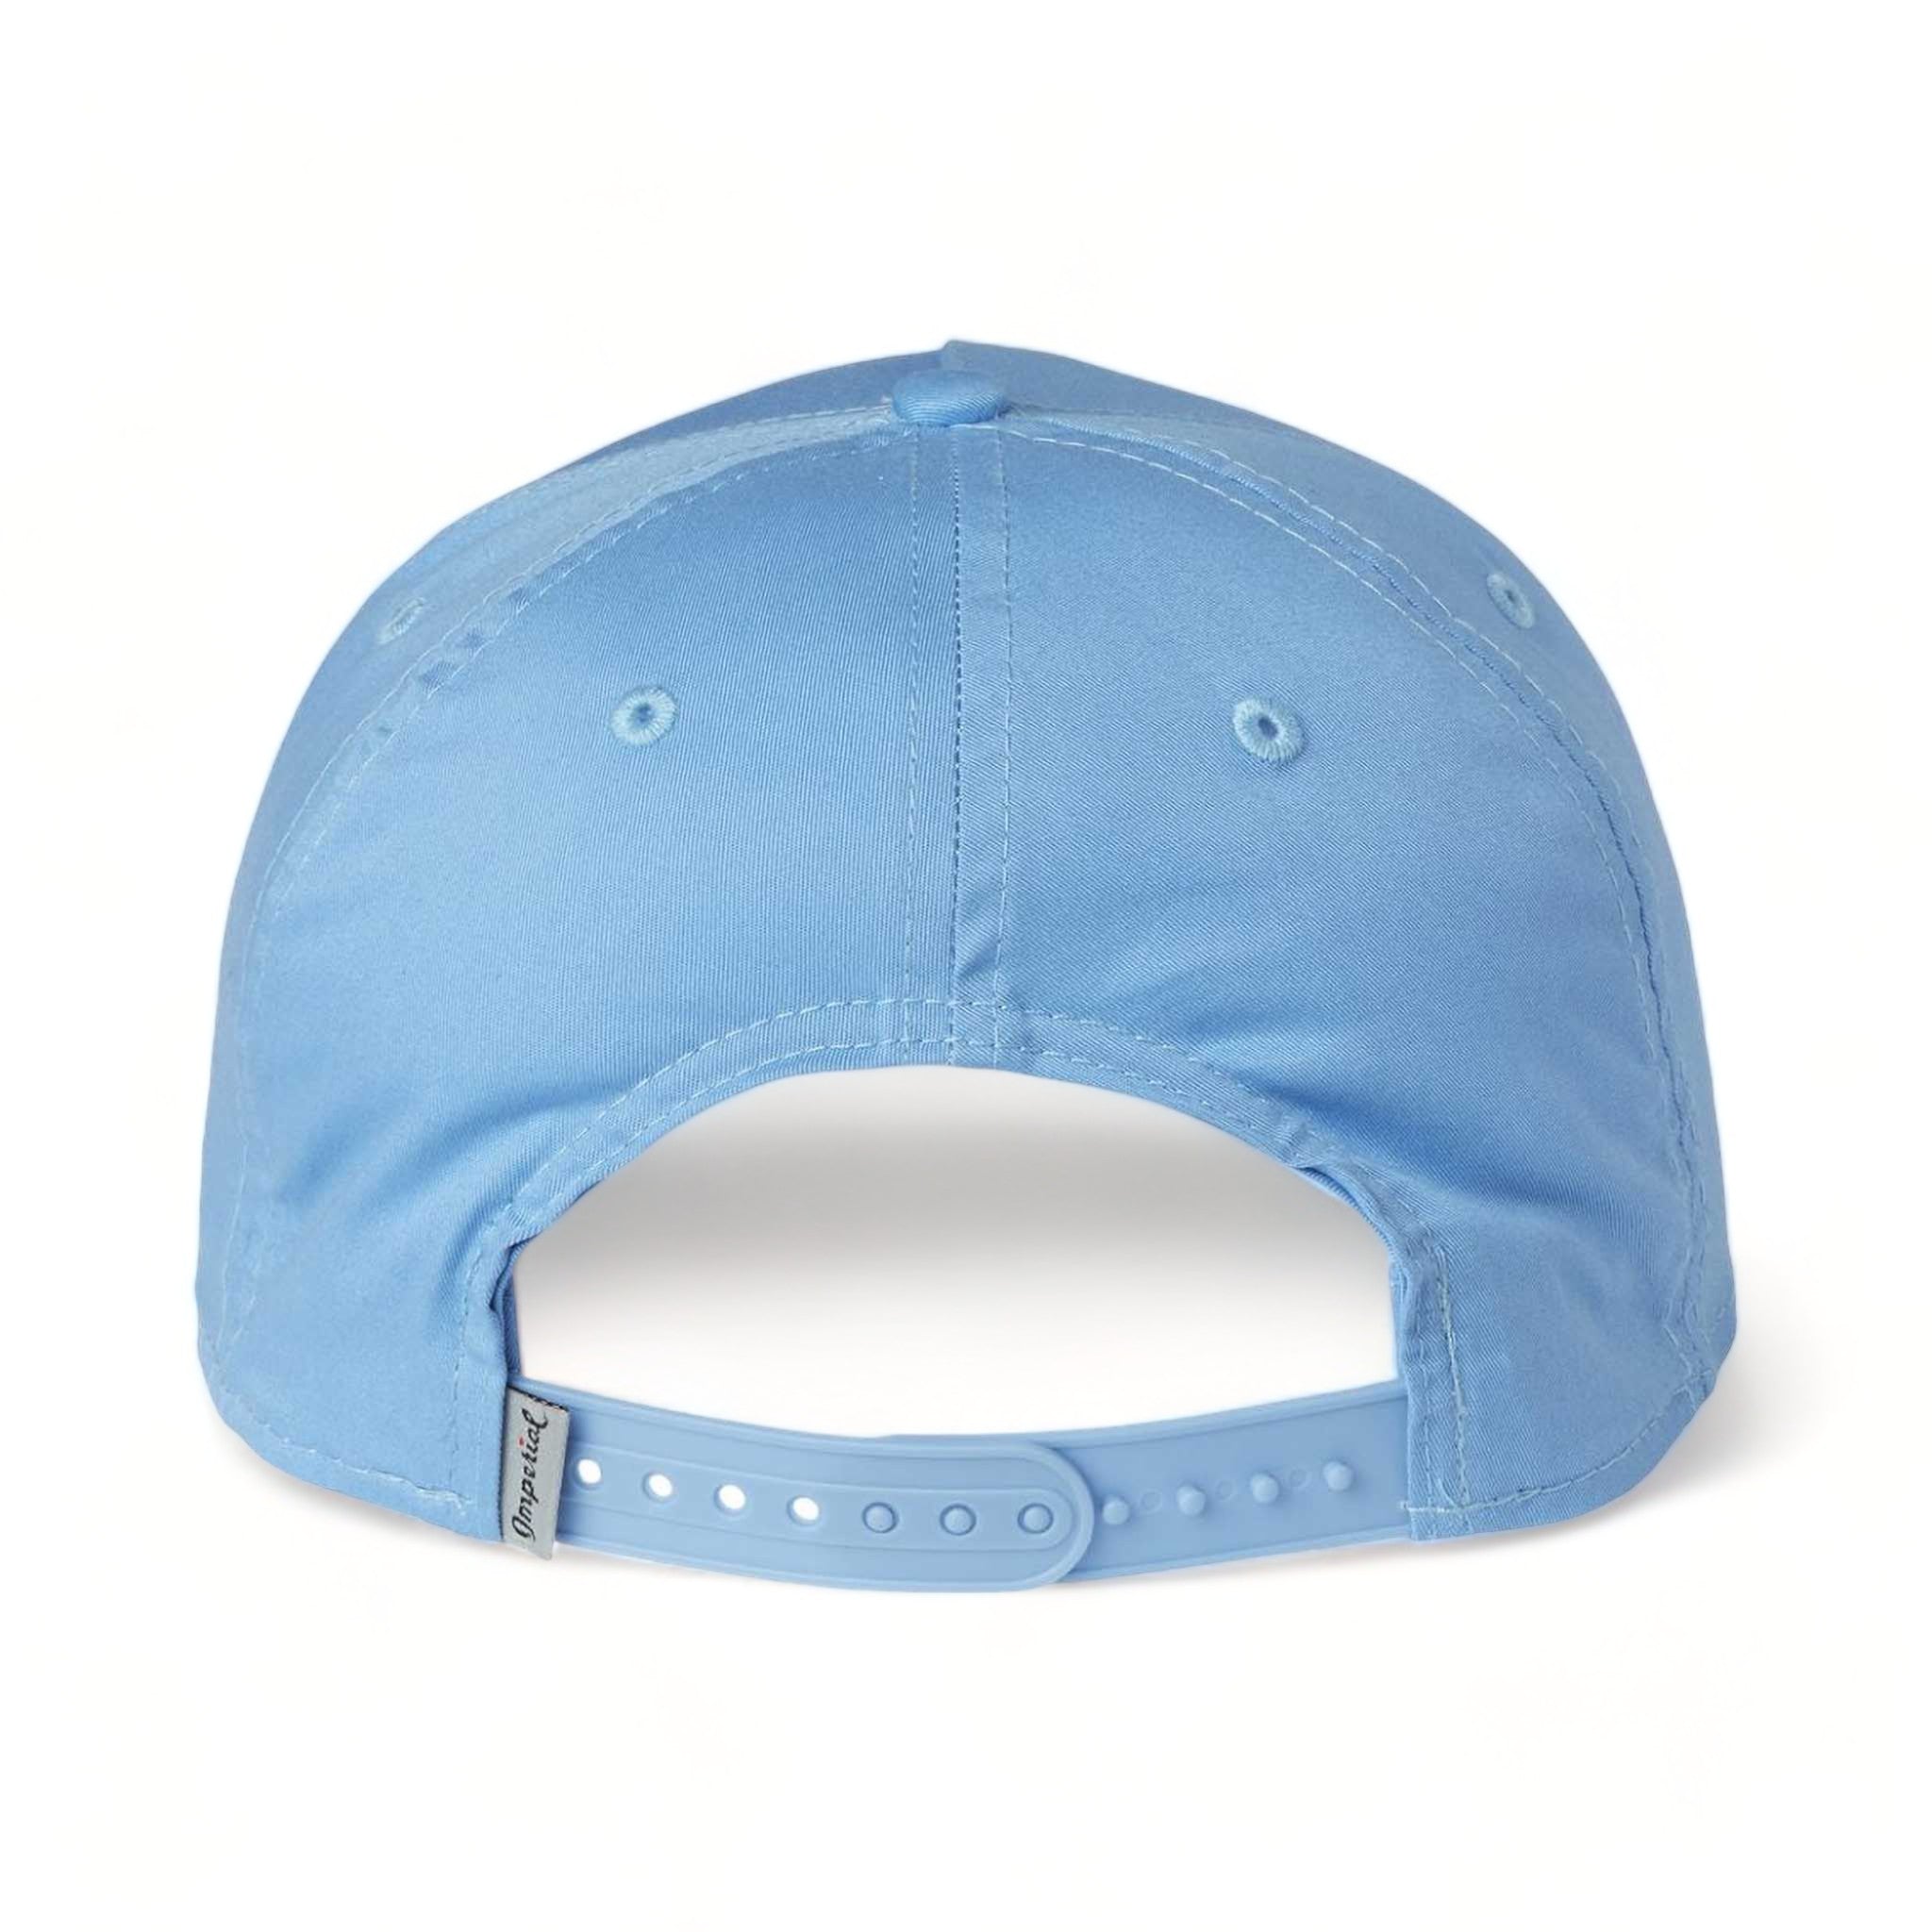 Back view of Imperial 5056 custom hat in powder blue and white